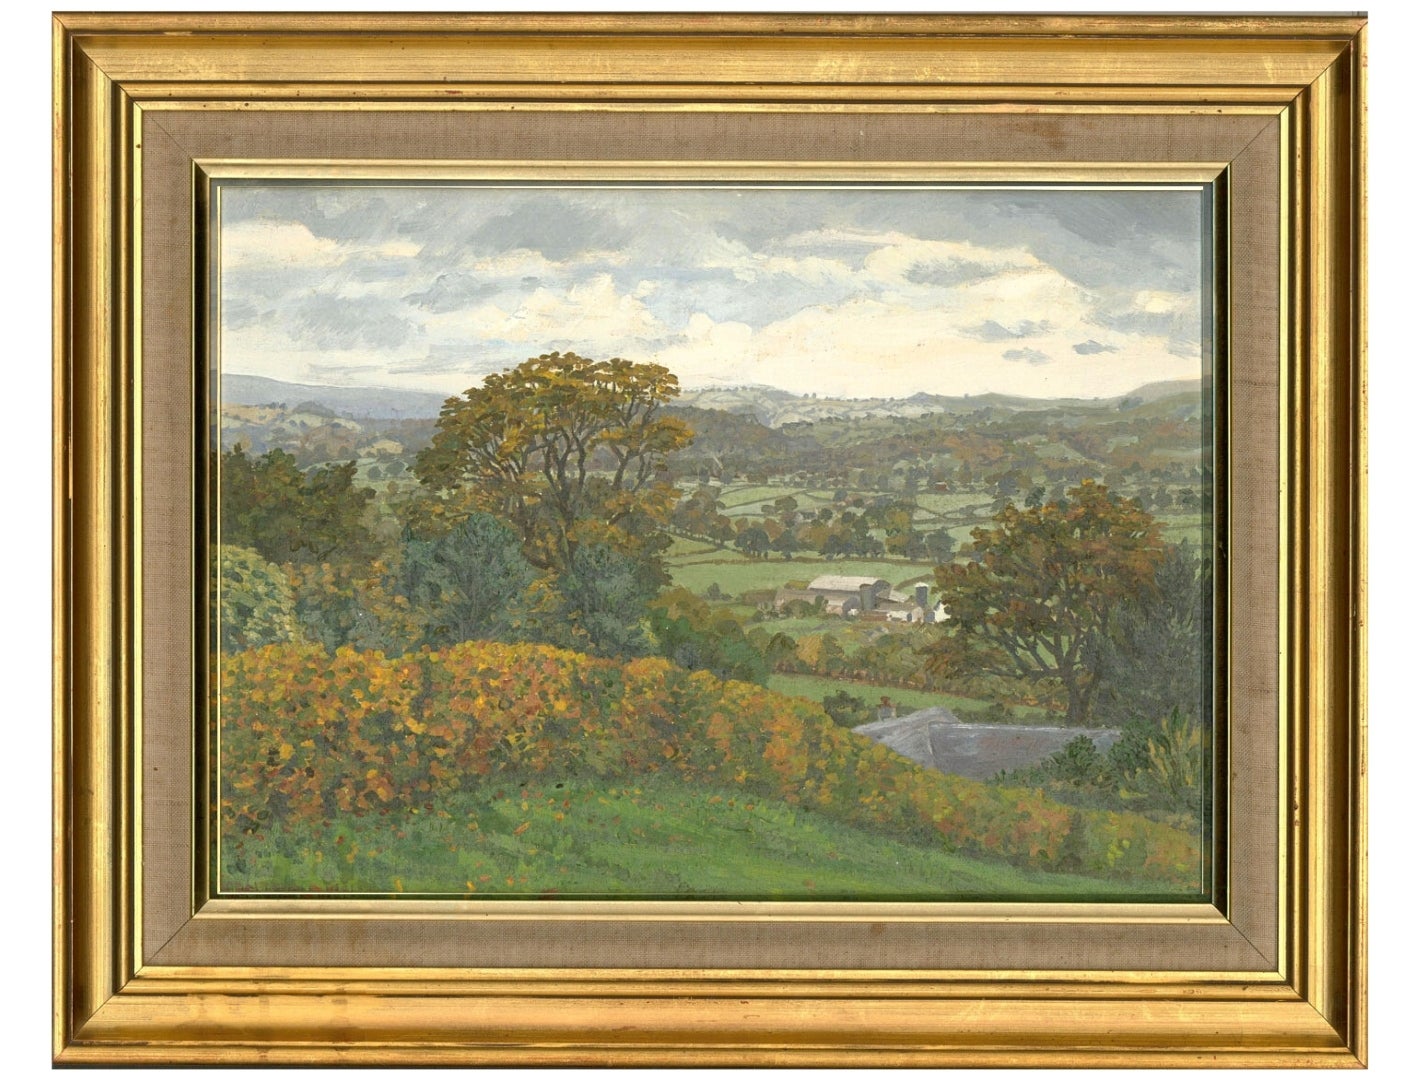 A fine topographical landscape in oil showing an expansive view across the vale of Clwyd, Wales. The artist has wonderfully captured the steely sky and golden leaves of an overcast, Autumn afternoon. The painting has been signed and dated (partially